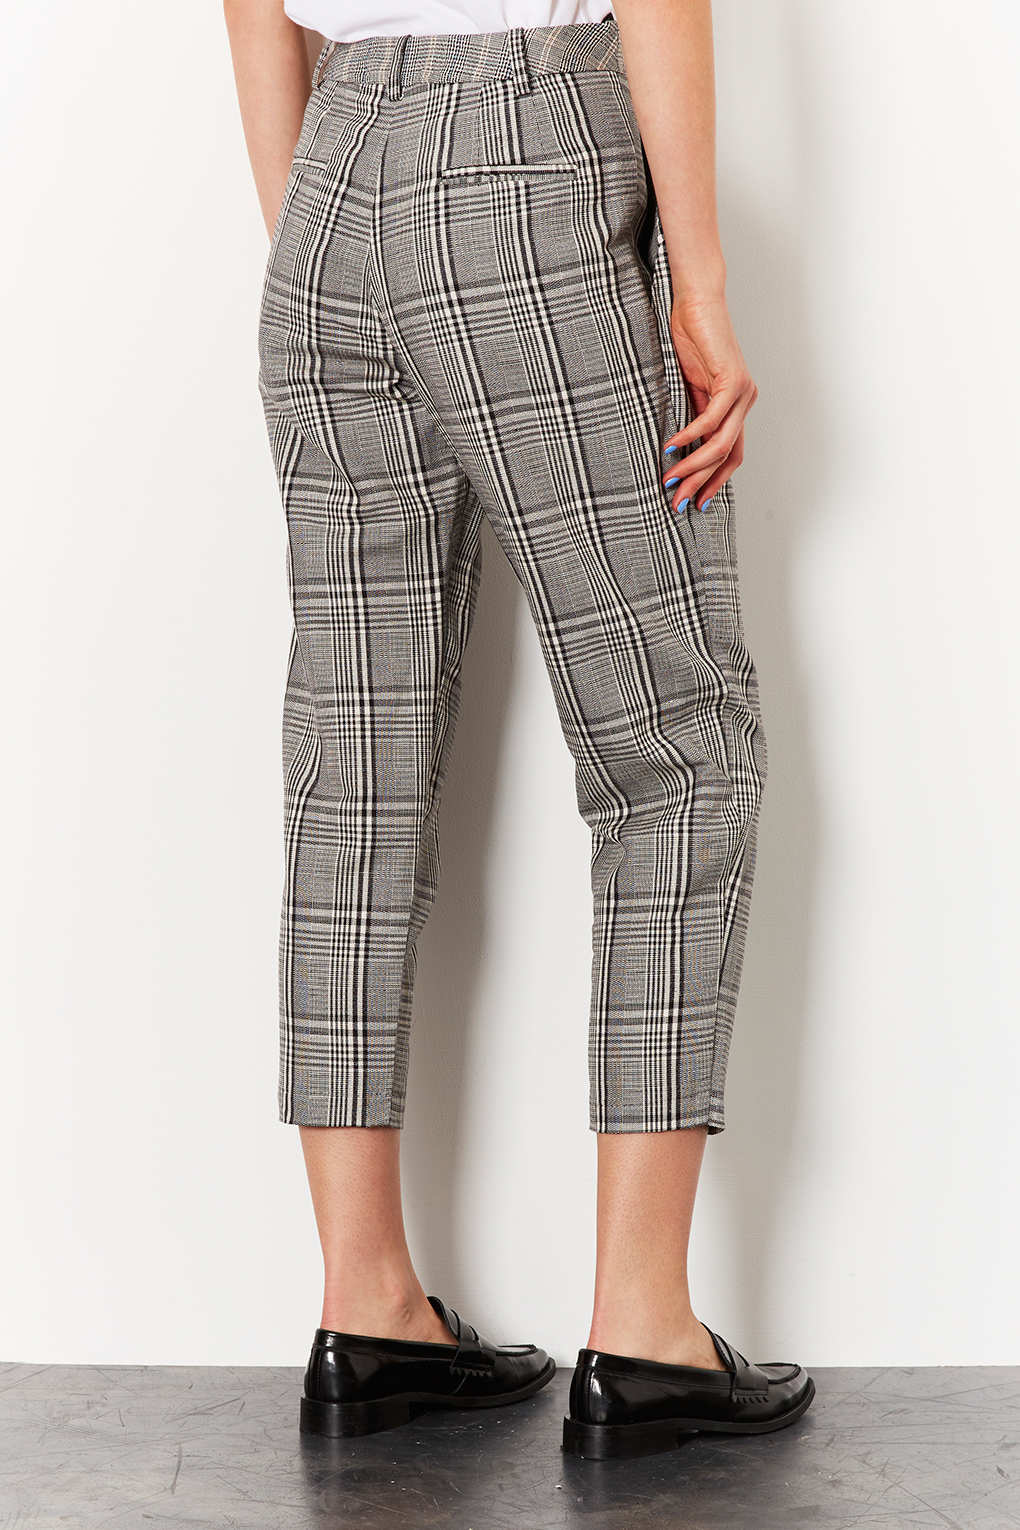 TOPSHOP Check Contrast Tapered Trousers in Grey (Grey) - Lyst